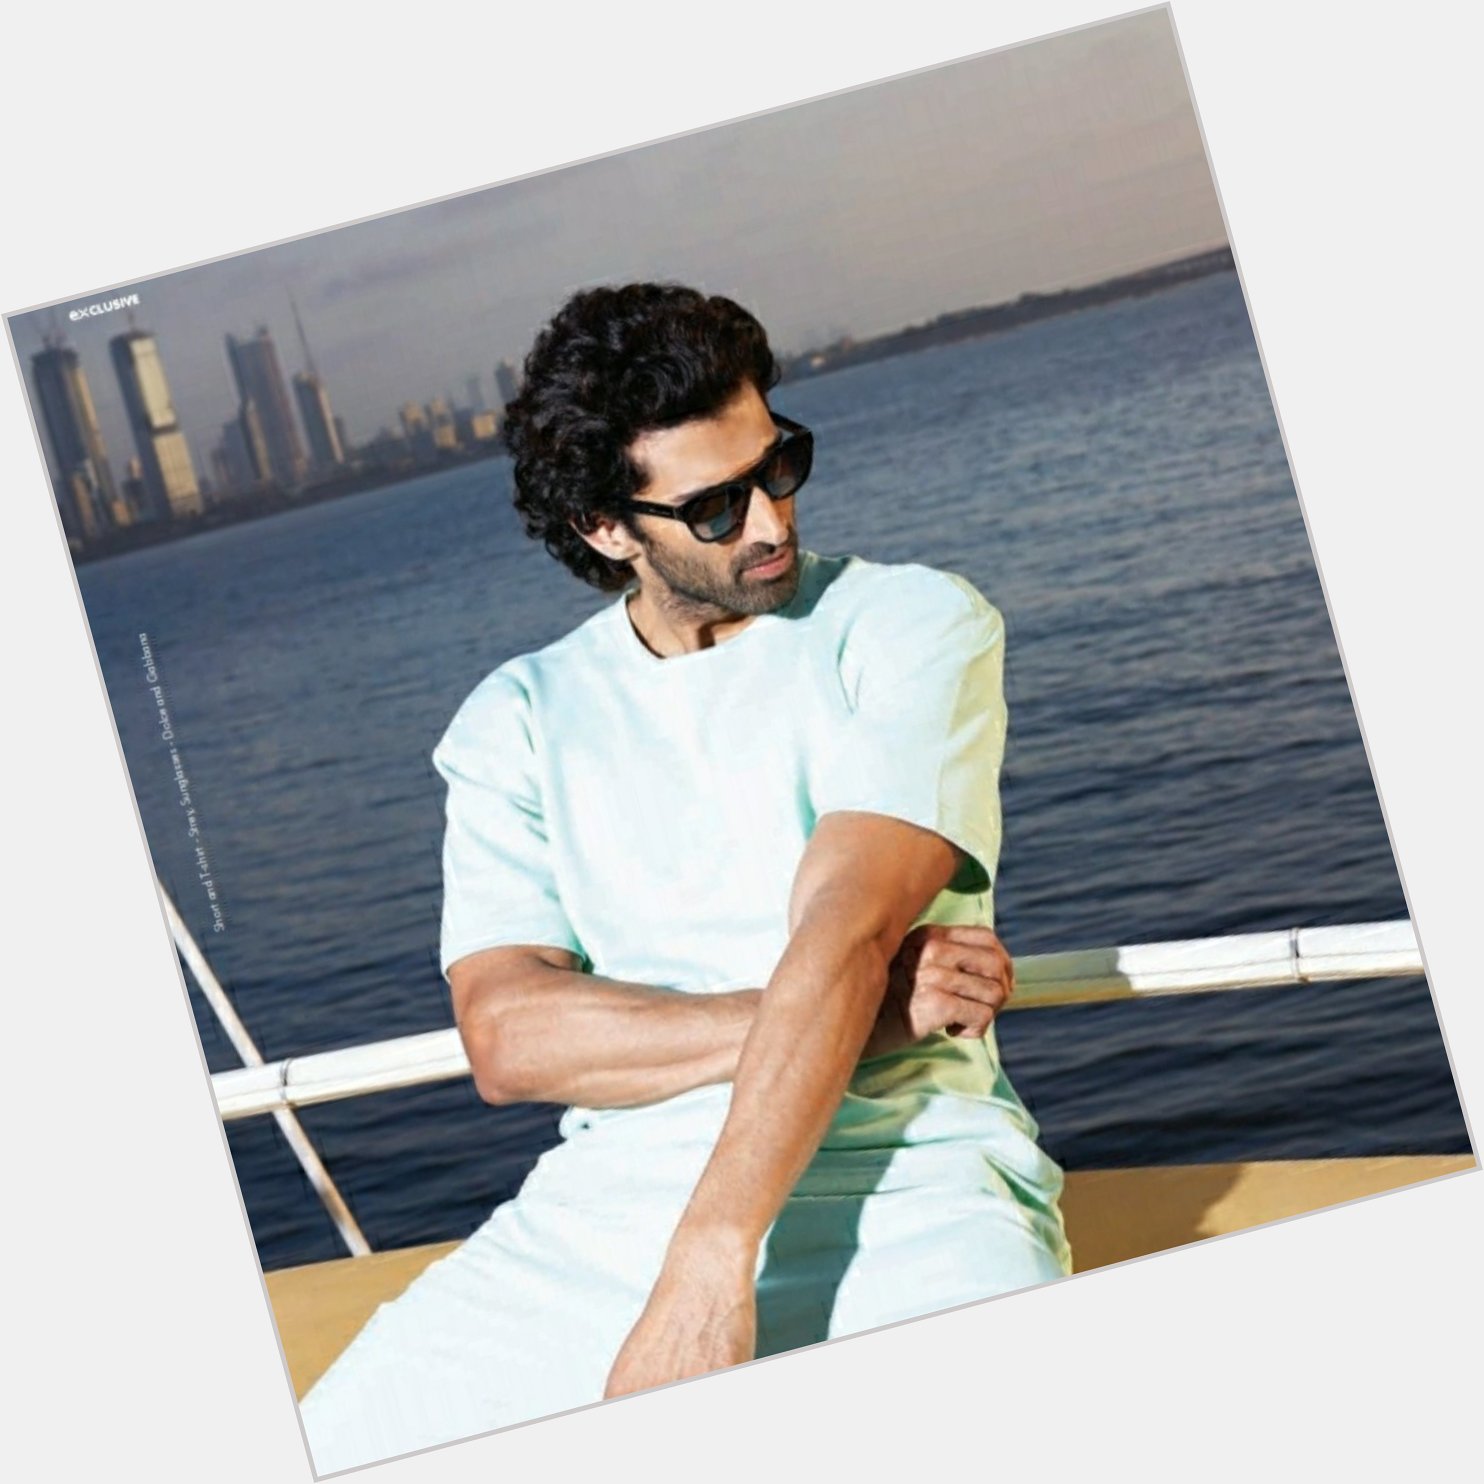 Embracing the year Aditya Roy Kapur has lined up infront of him!
Team Exhibit wishes him a very Happy Birthday 